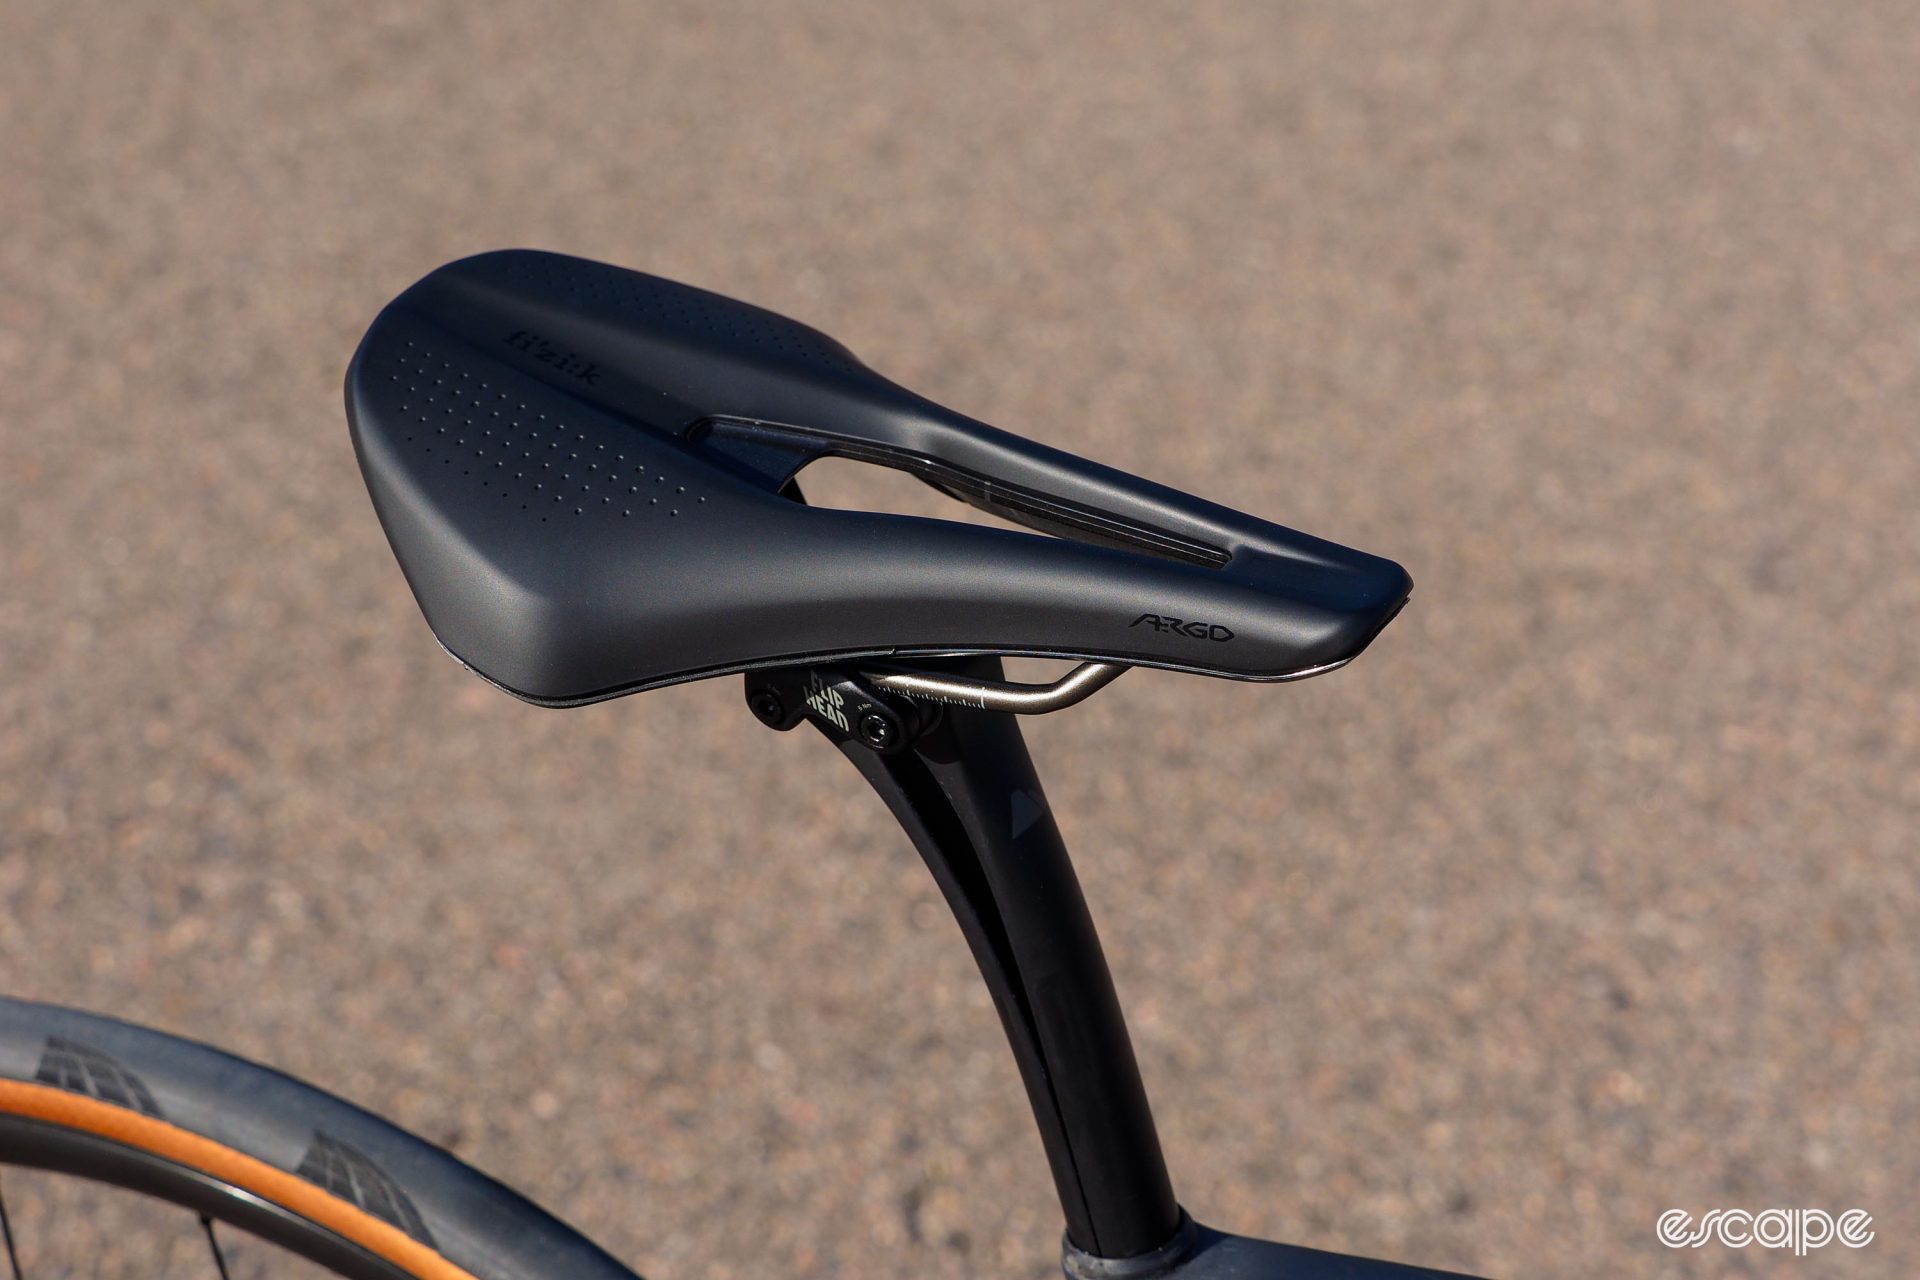 Fizik's Argo saddle features a stubby nose, wide and flat rear section and generous cutout.